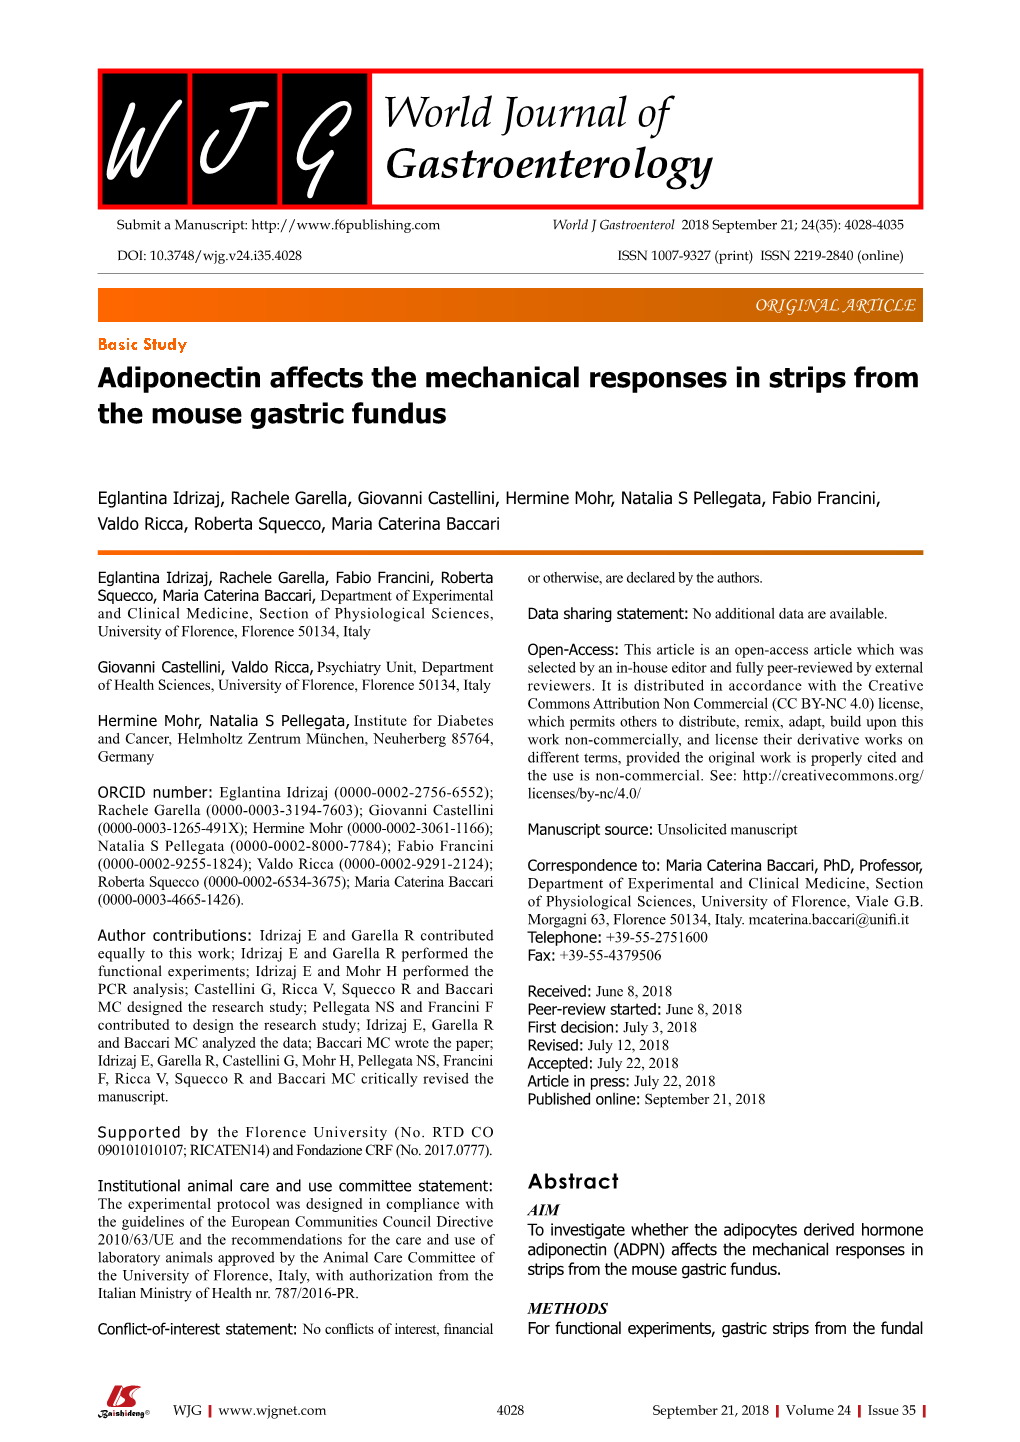 Adiponectin Affects the Mechanical Responses in Strips from the Mouse Gastric Fundus